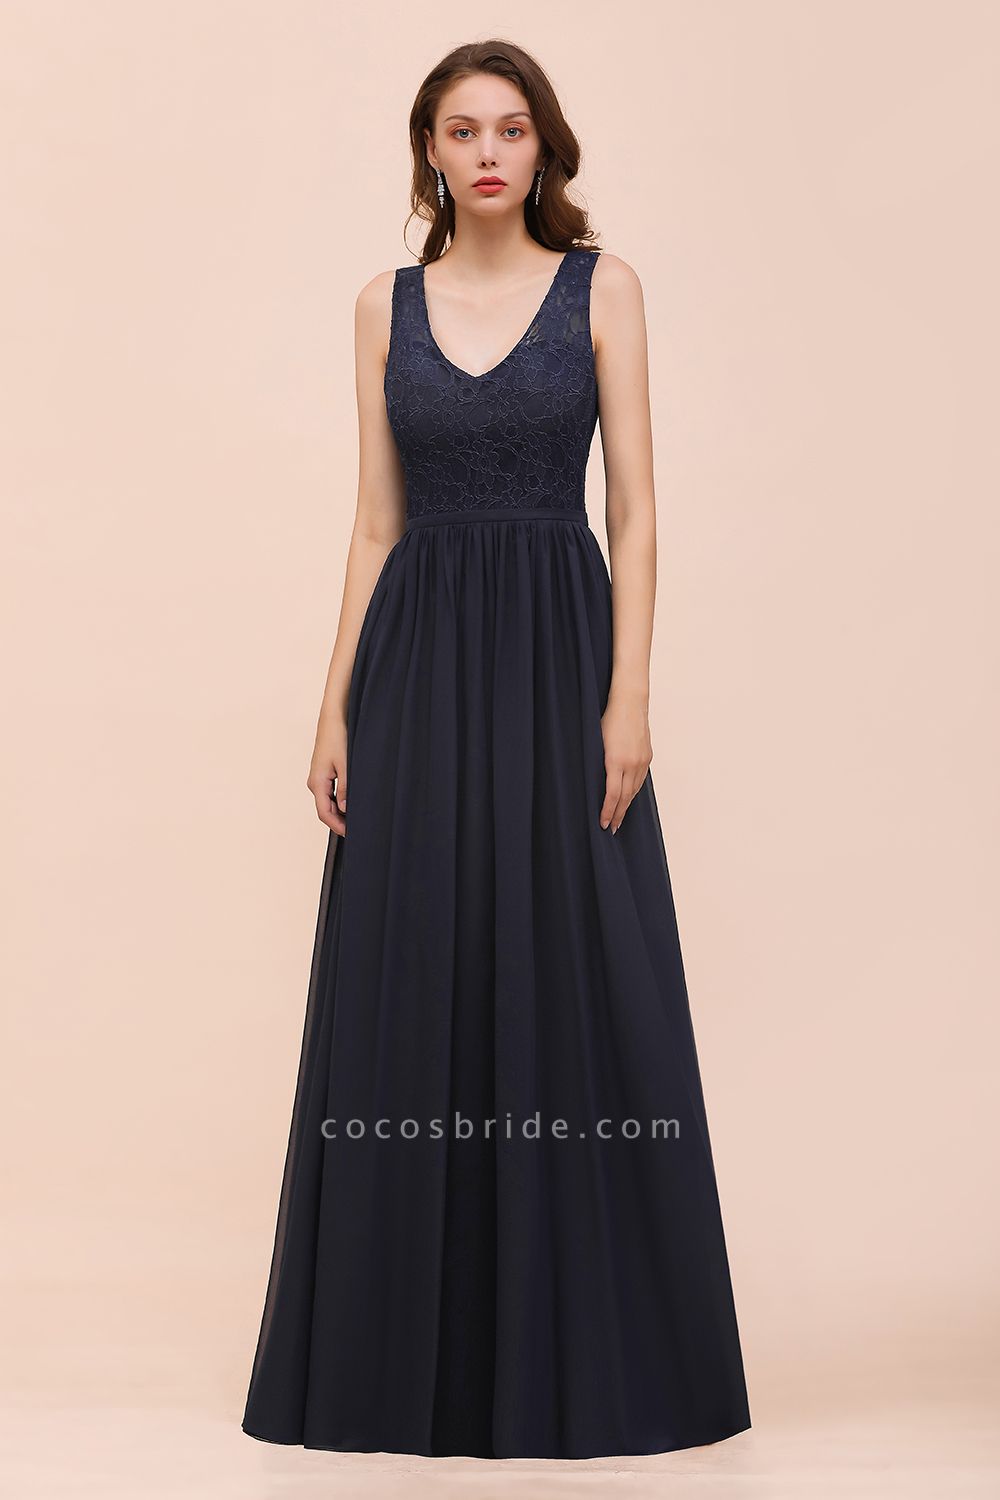 Elegant V-neck Wide Straps A-line Floor-length Chiffon Bridesmaid Dress With Ruched